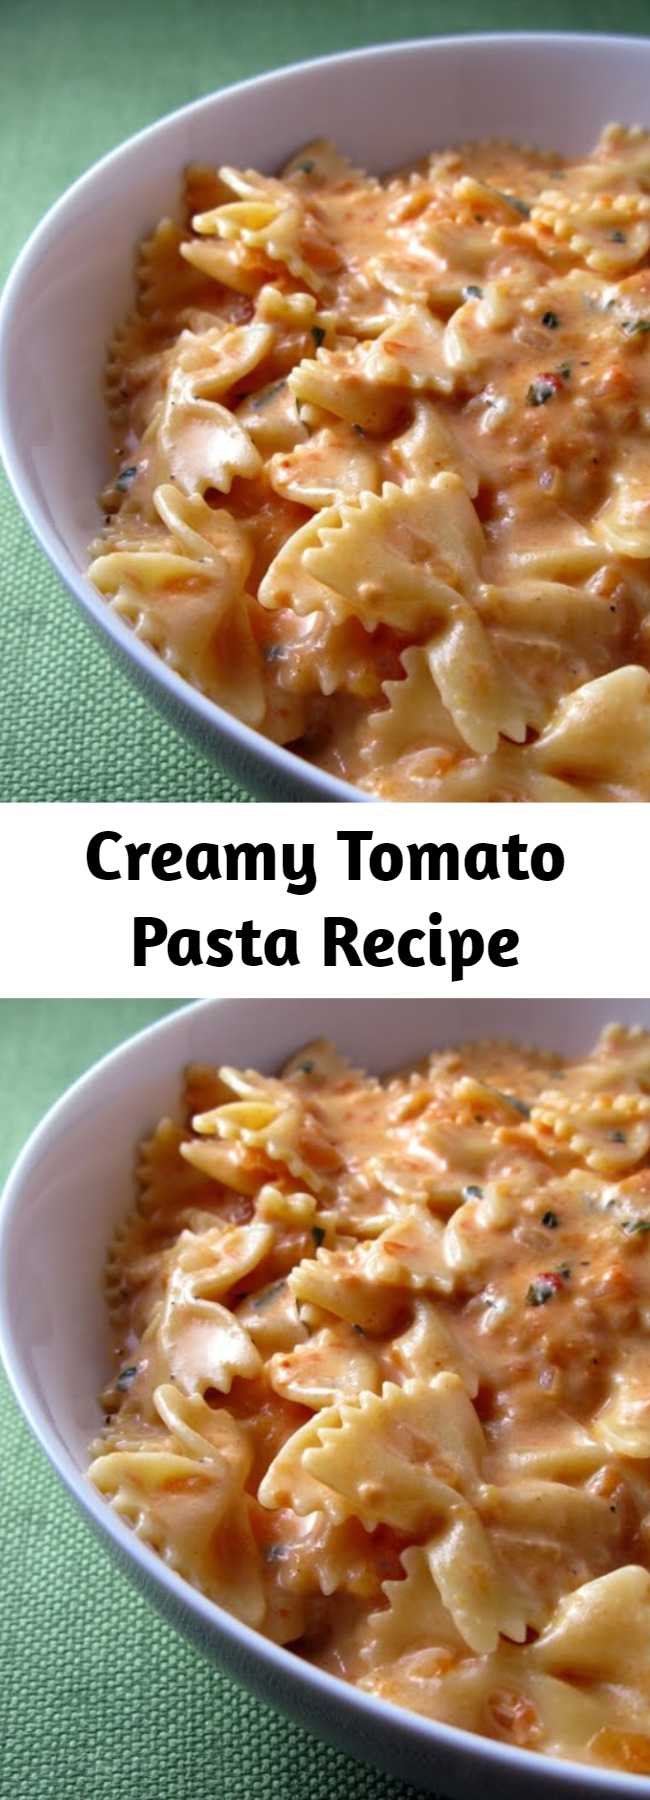 Creamy Tomato Pasta Recipe - The perfect combination: tomatoes and cream and cheese. It was even better than i expected. Guaranteed you'll fight over who gets seconds, just like we did.